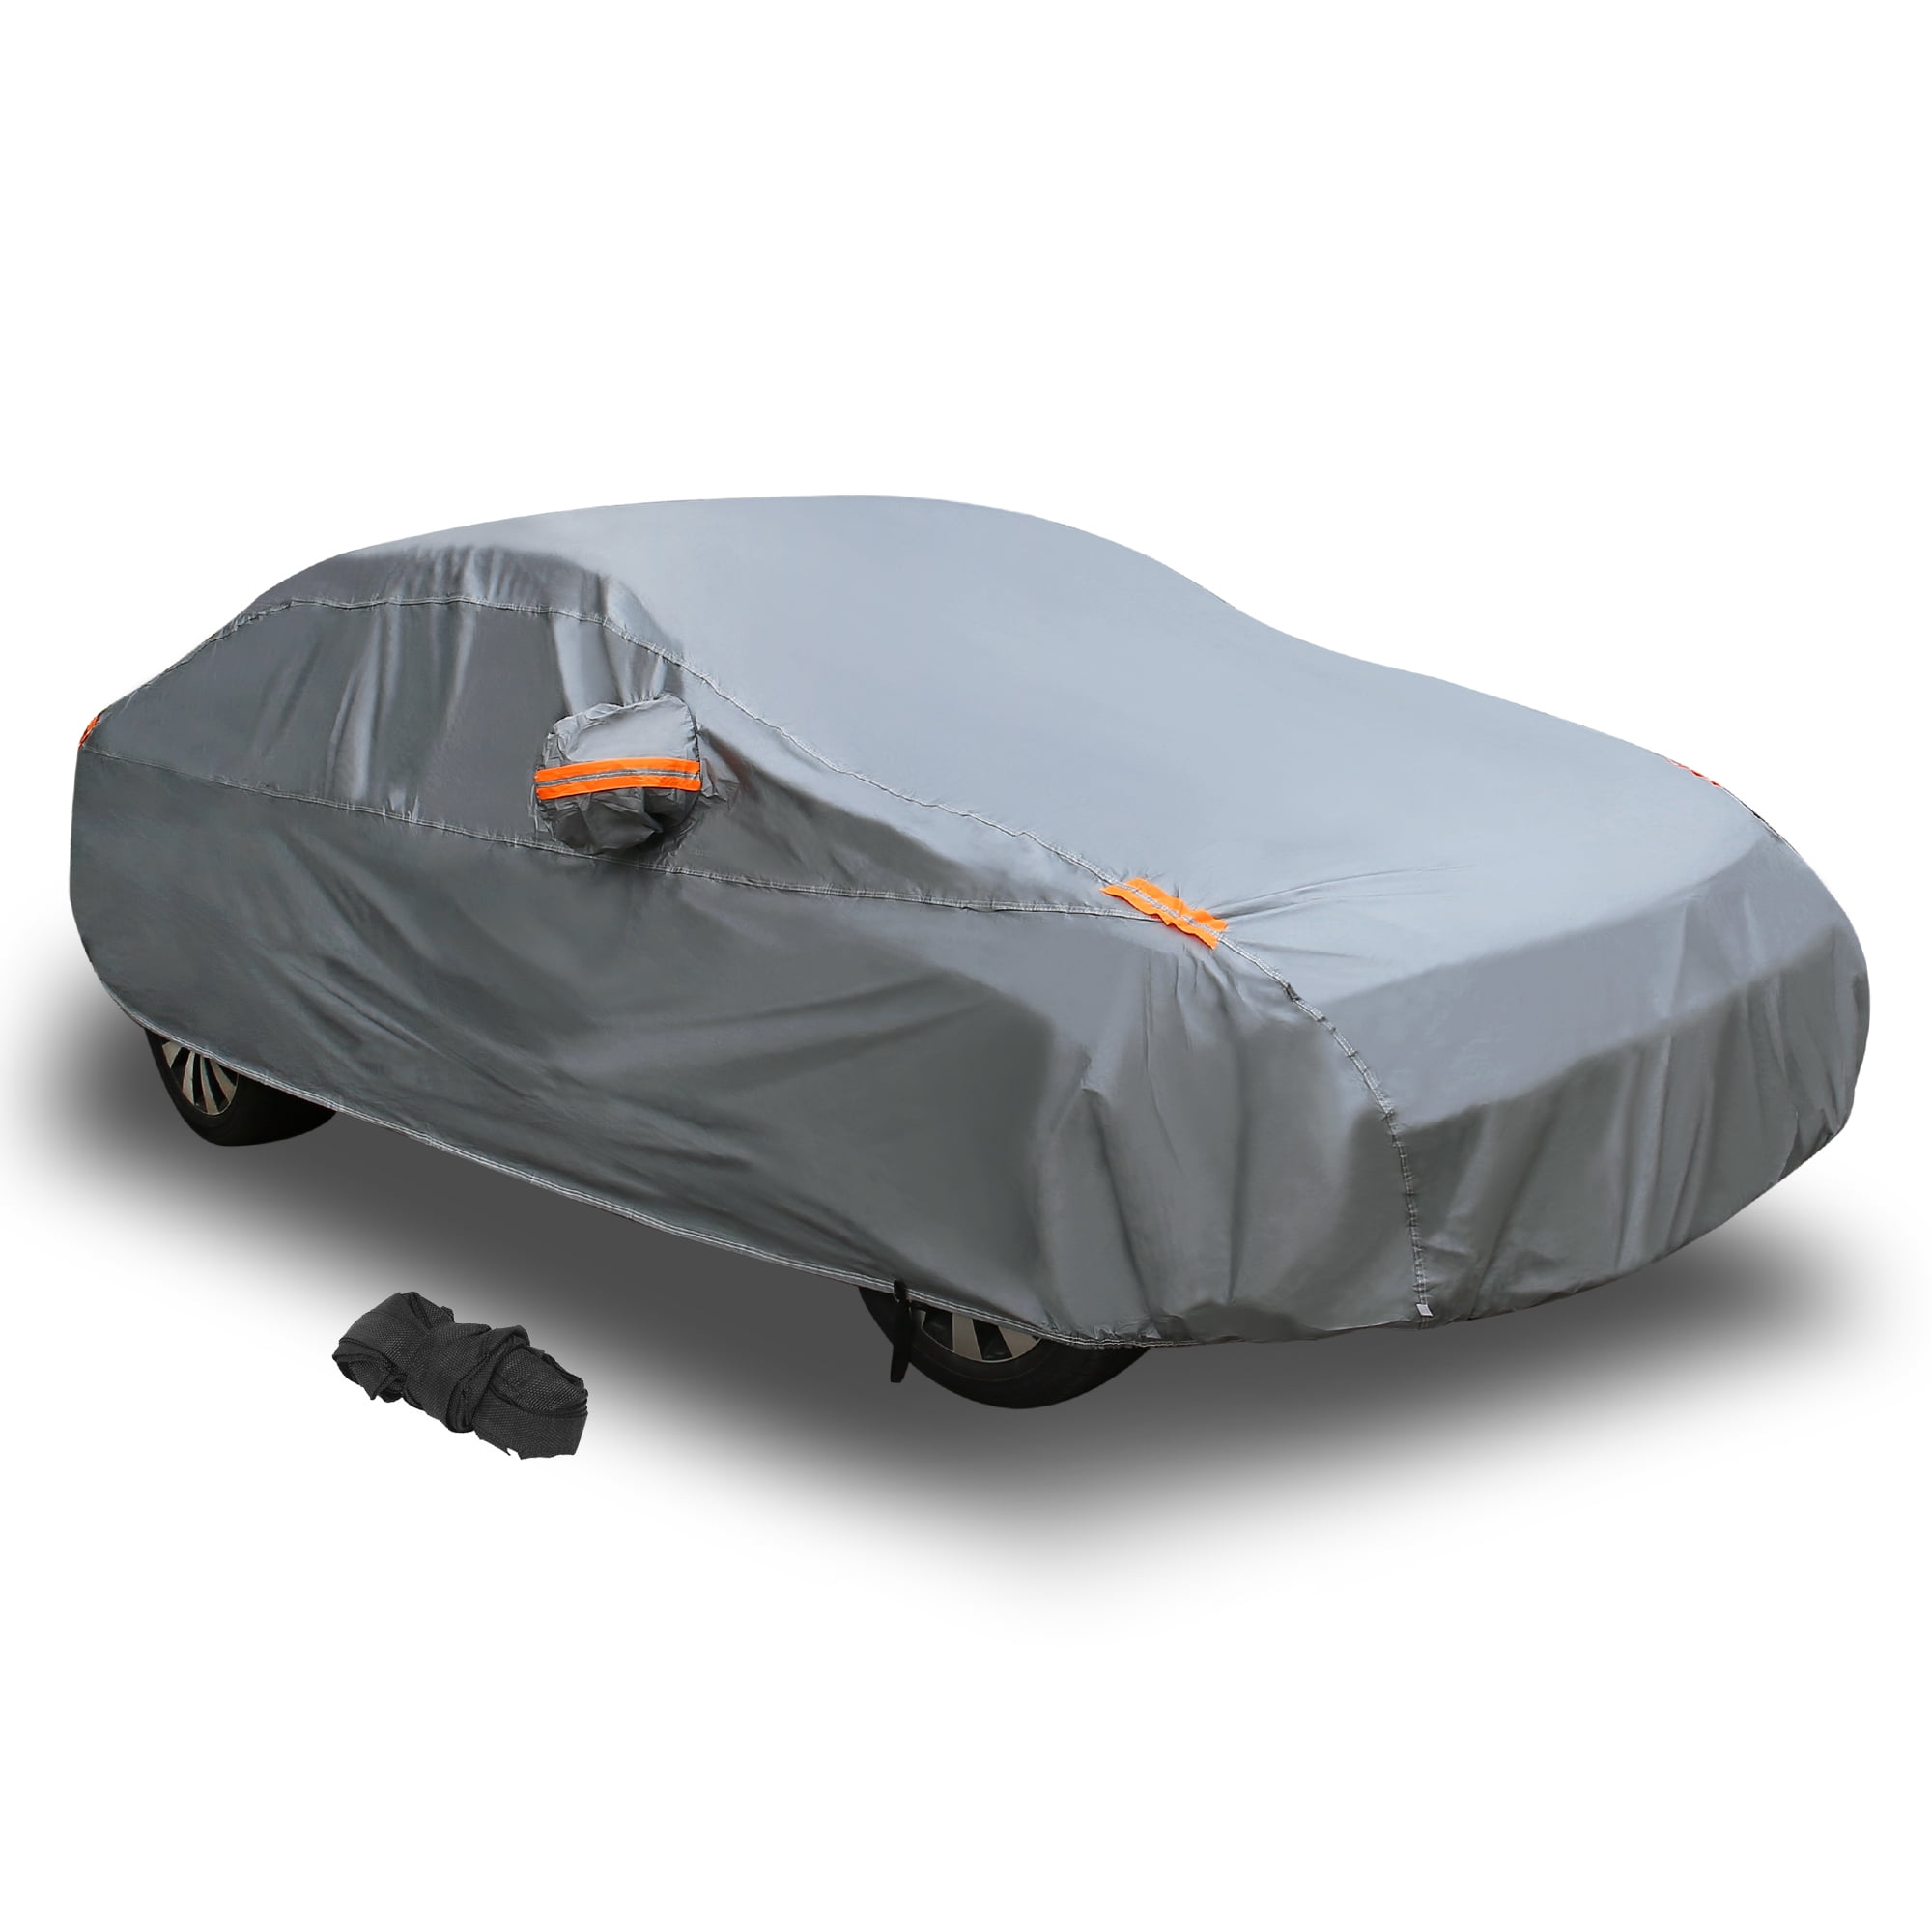 Universal Full Car Covers with Zipper Door Car Cover SUV All Weather Car Protection Waterproof/Windproof/Scratch Resistant/Reflective Strips for Wagon SUV Use in Size 191”L74”W72 H 